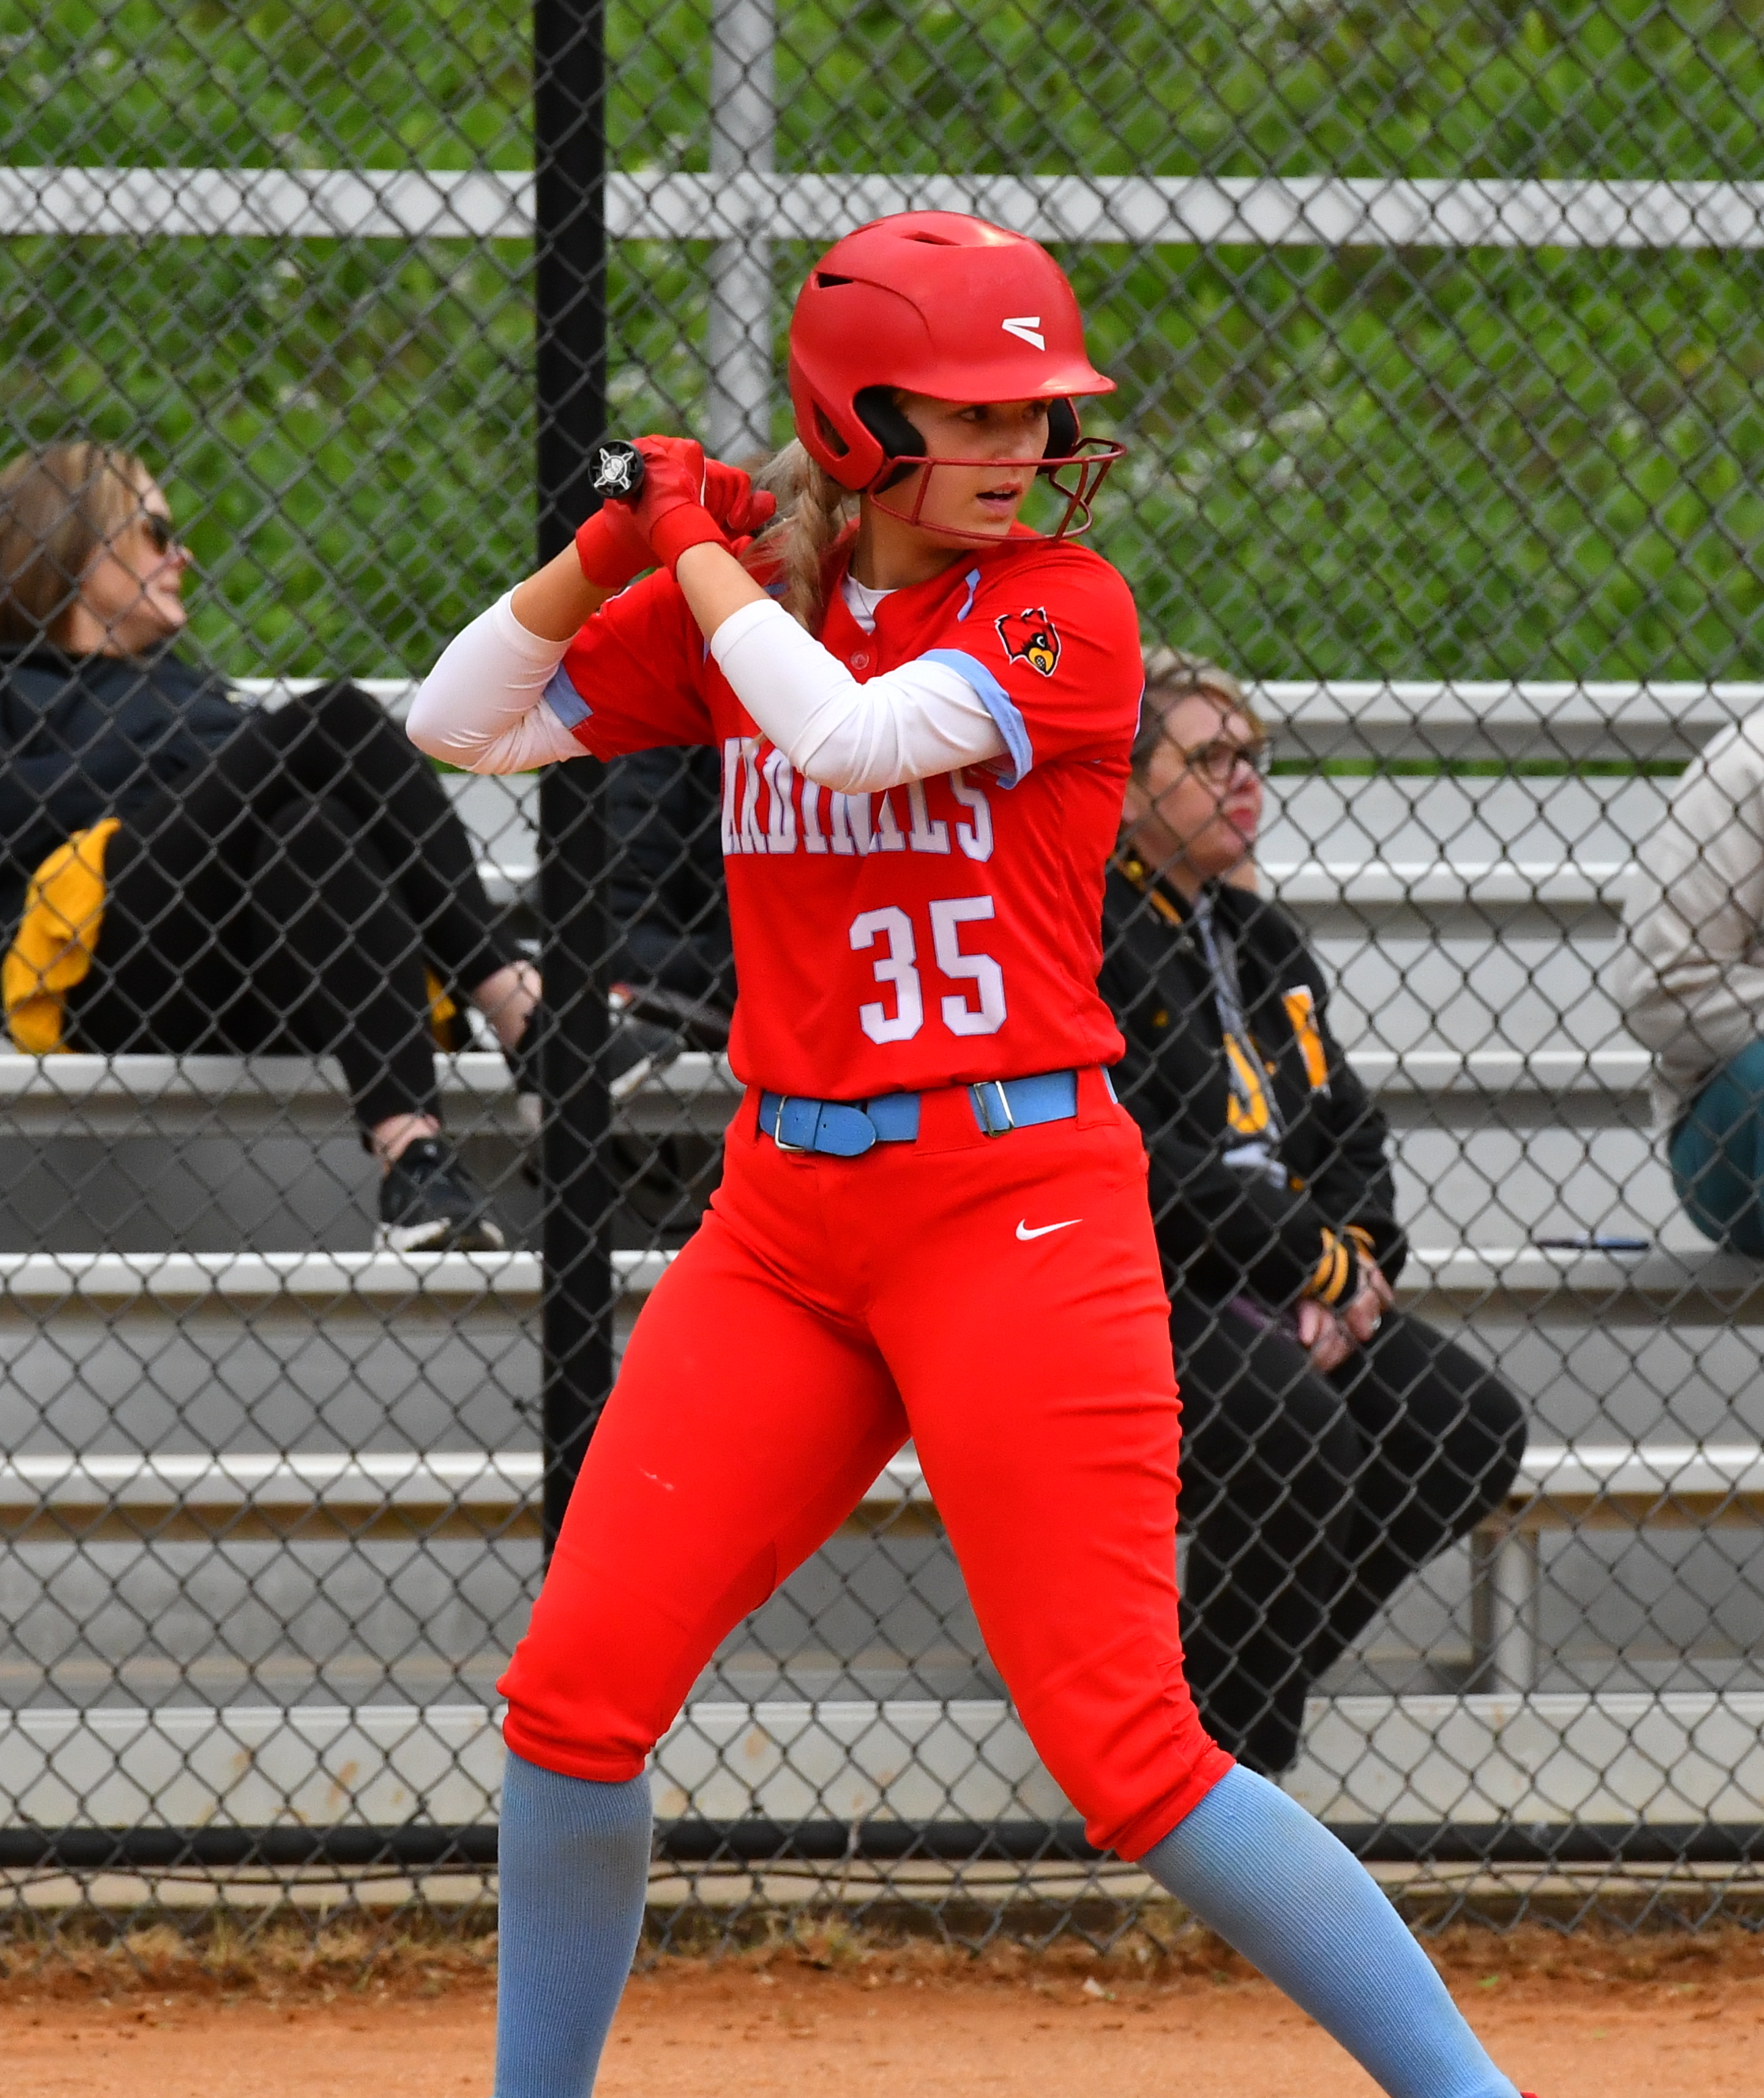 Lady Cards mercy-rule Prestonsburg, drop two others